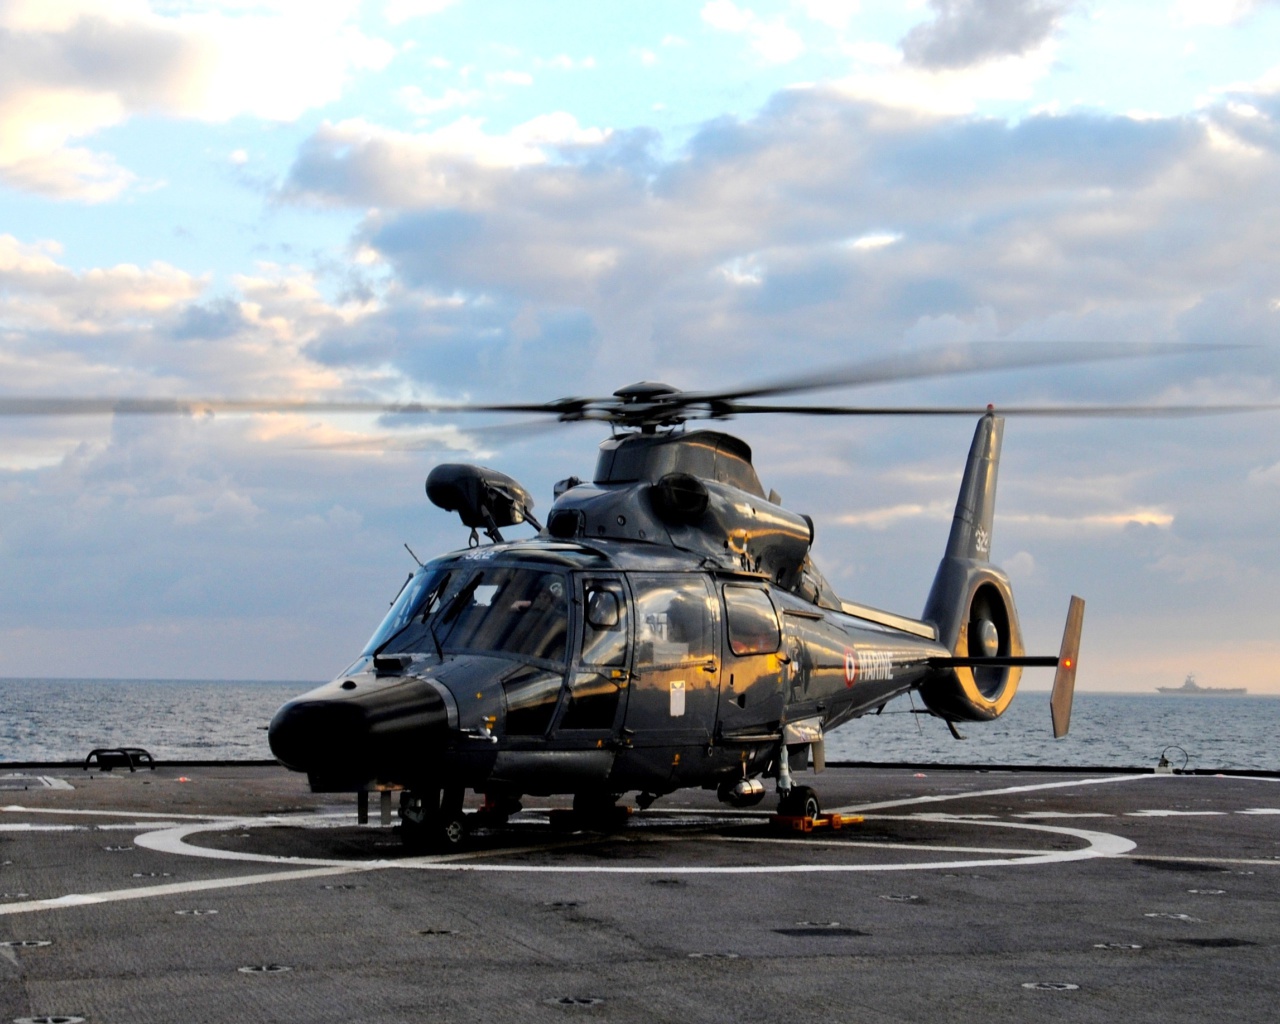 Helicopter on Aircraft Carrier wallpaper 1280x1024